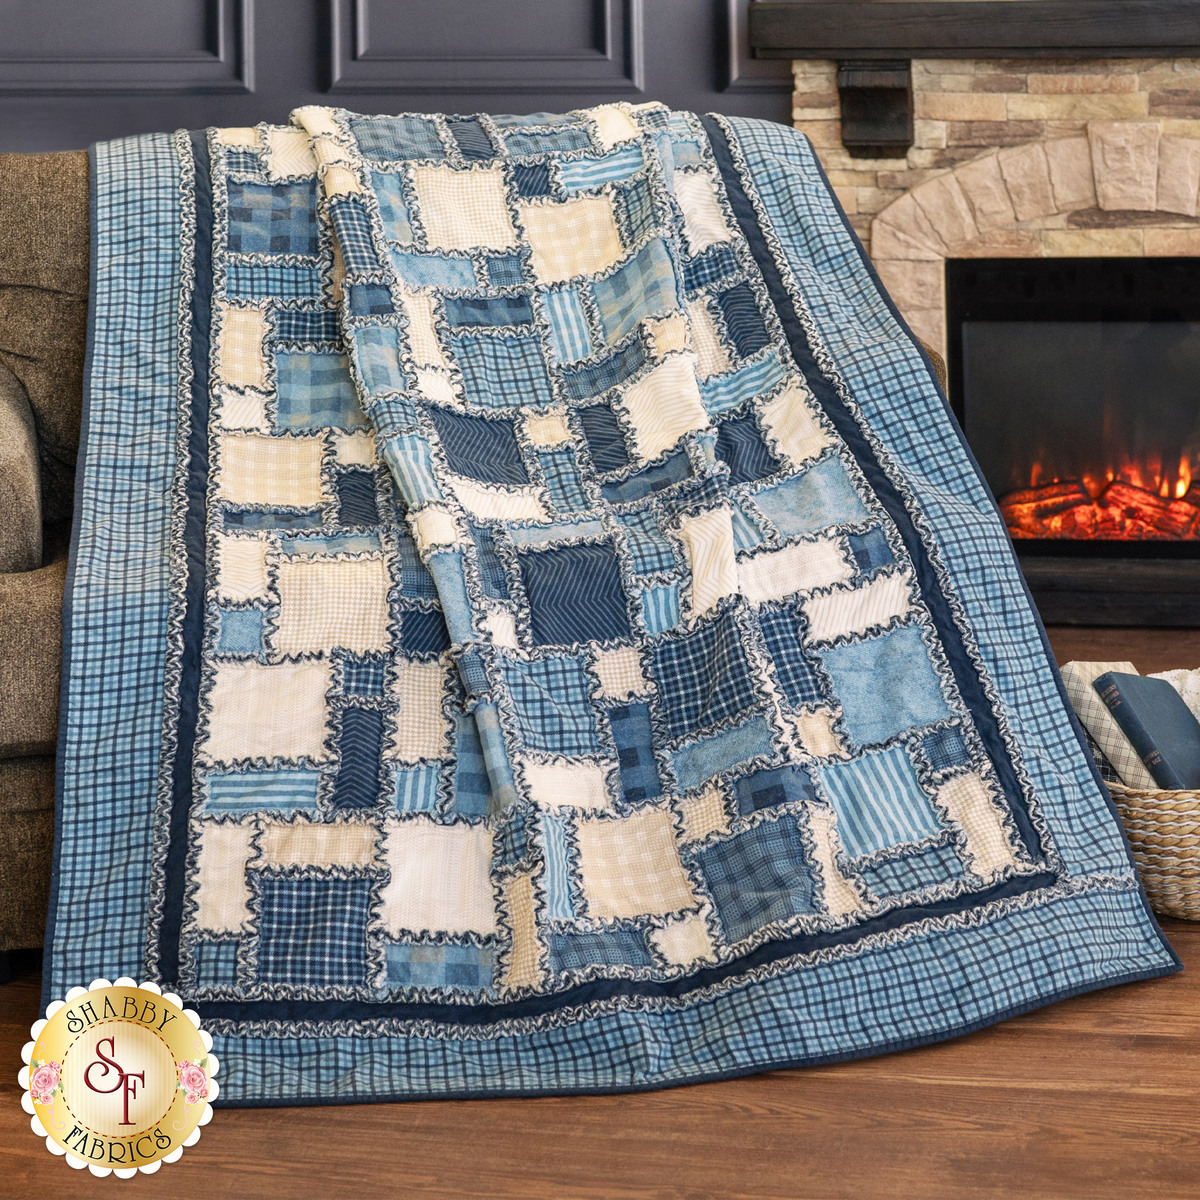 How to Make a Cuddly Rag Quilt